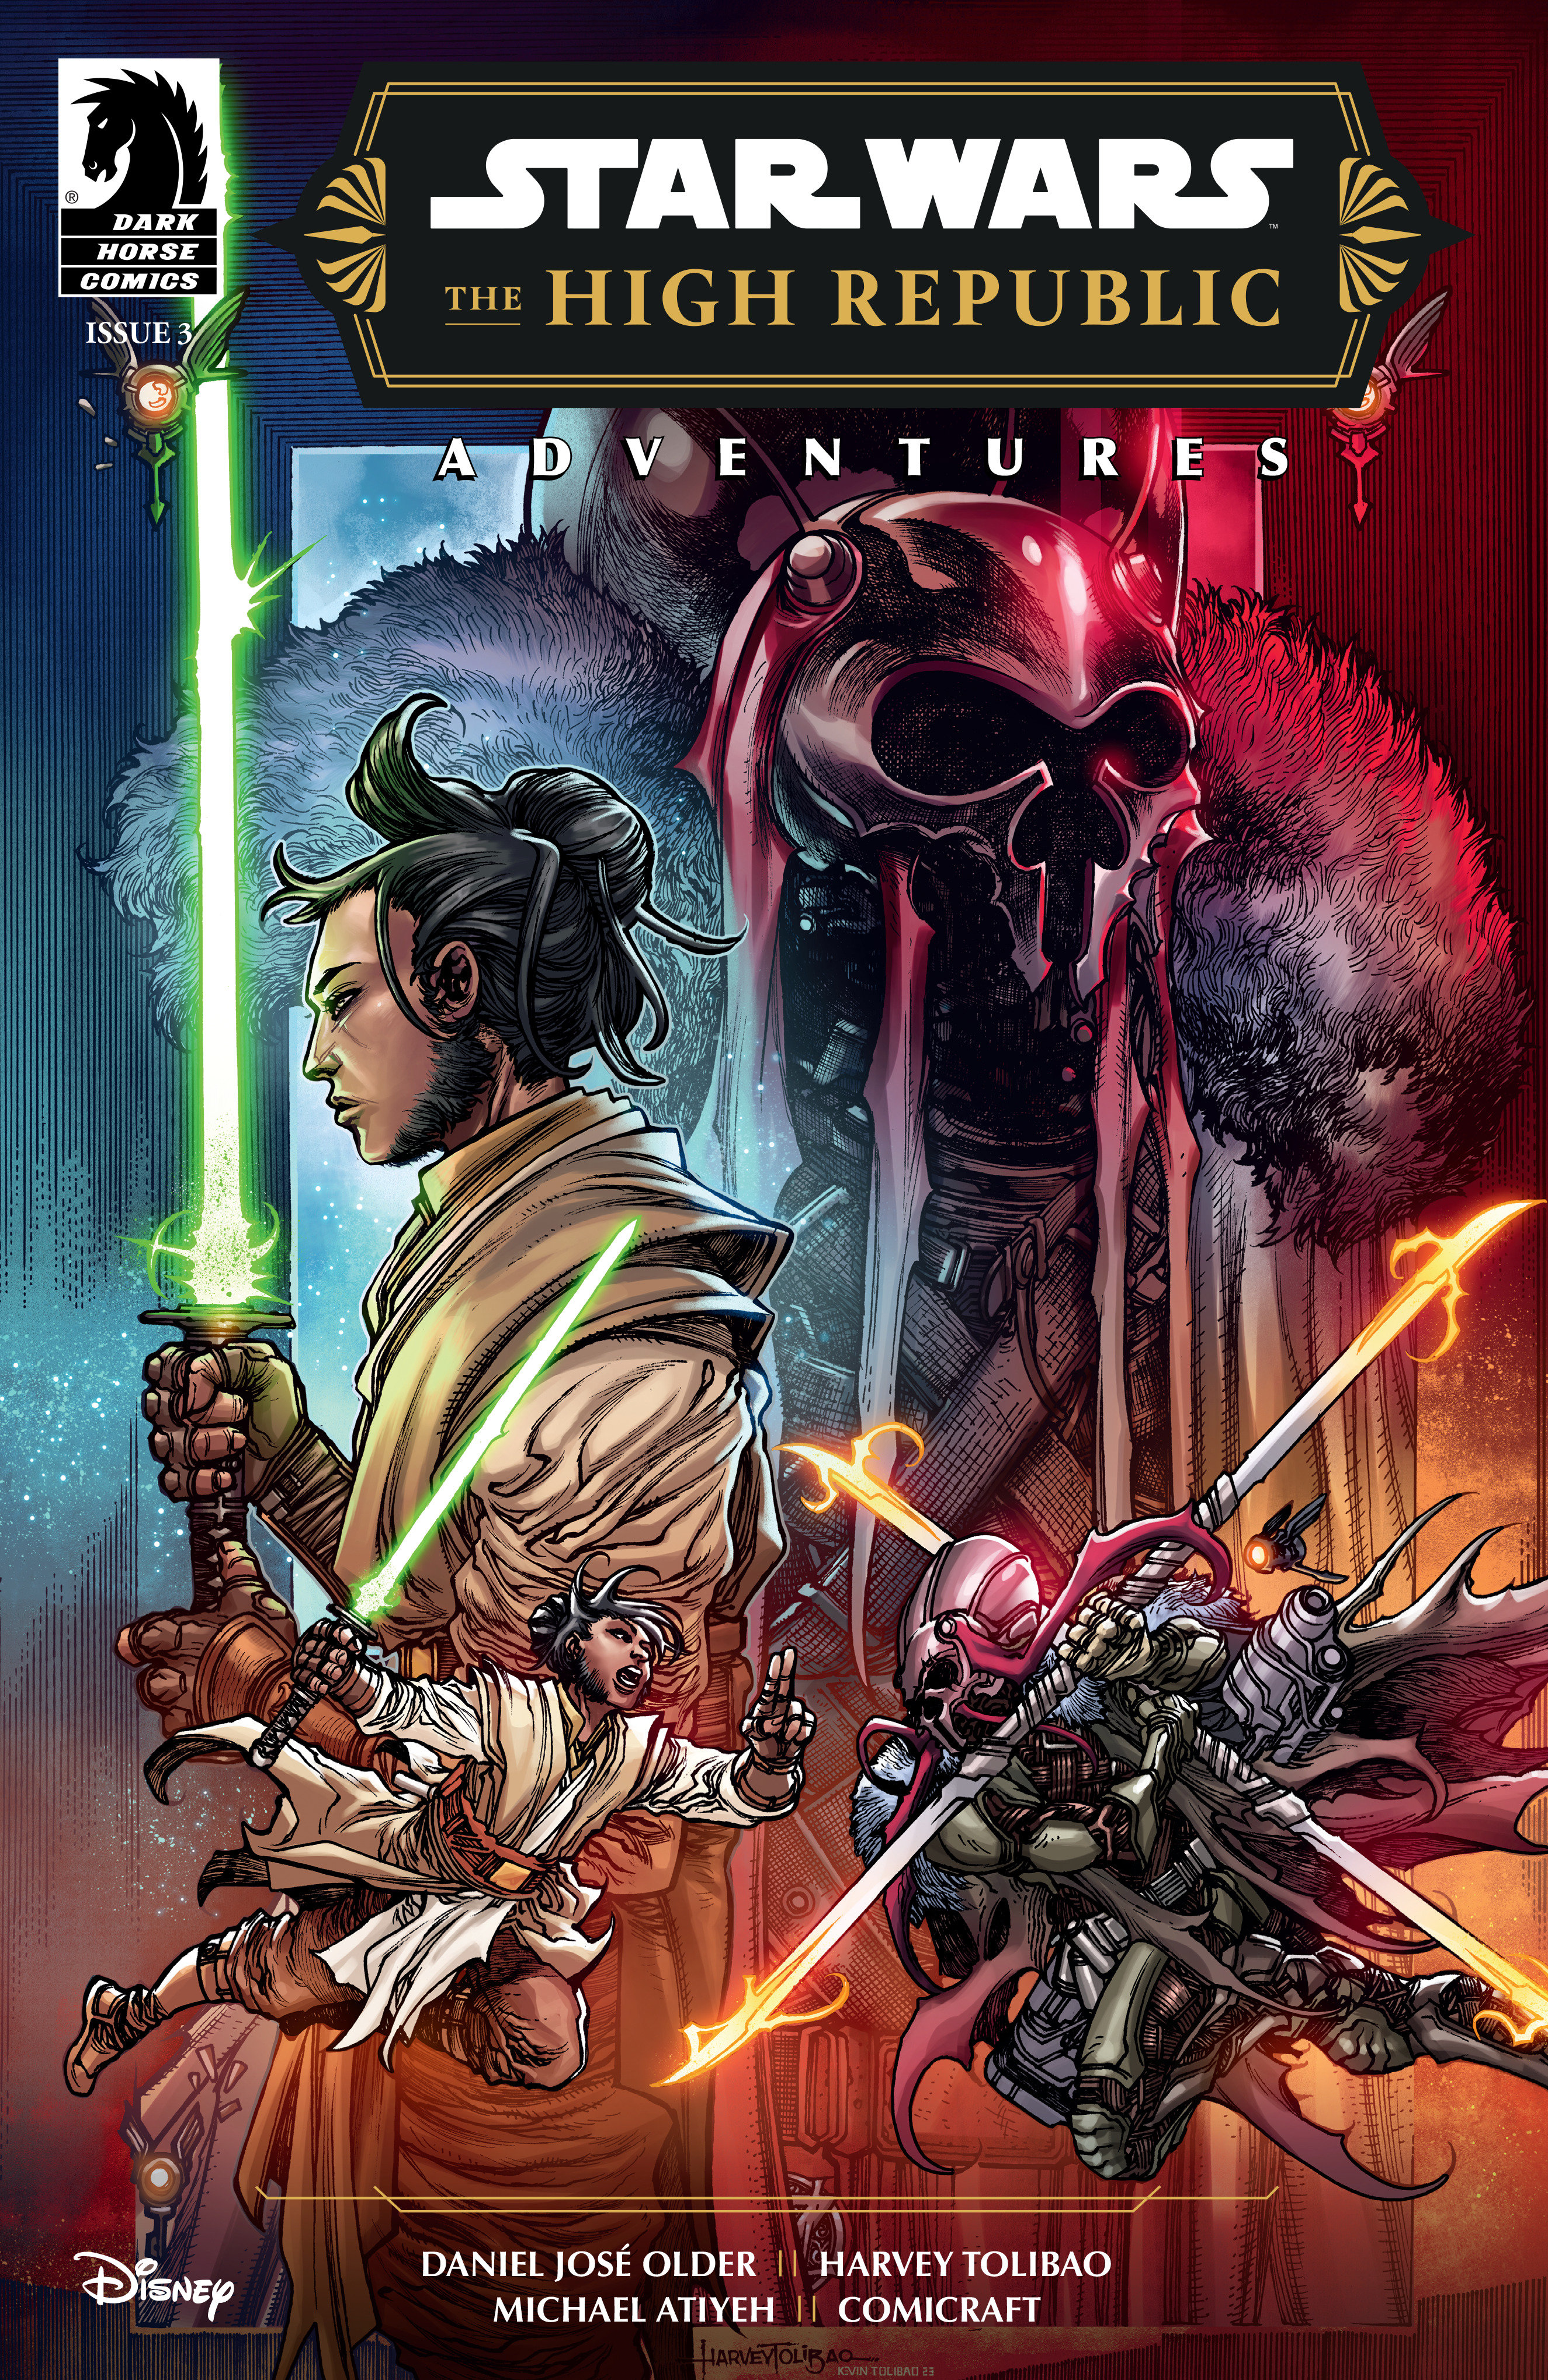 Star Wars: The High Republic Adventures Phase III #3 Cover A (Harvey Tolibao)